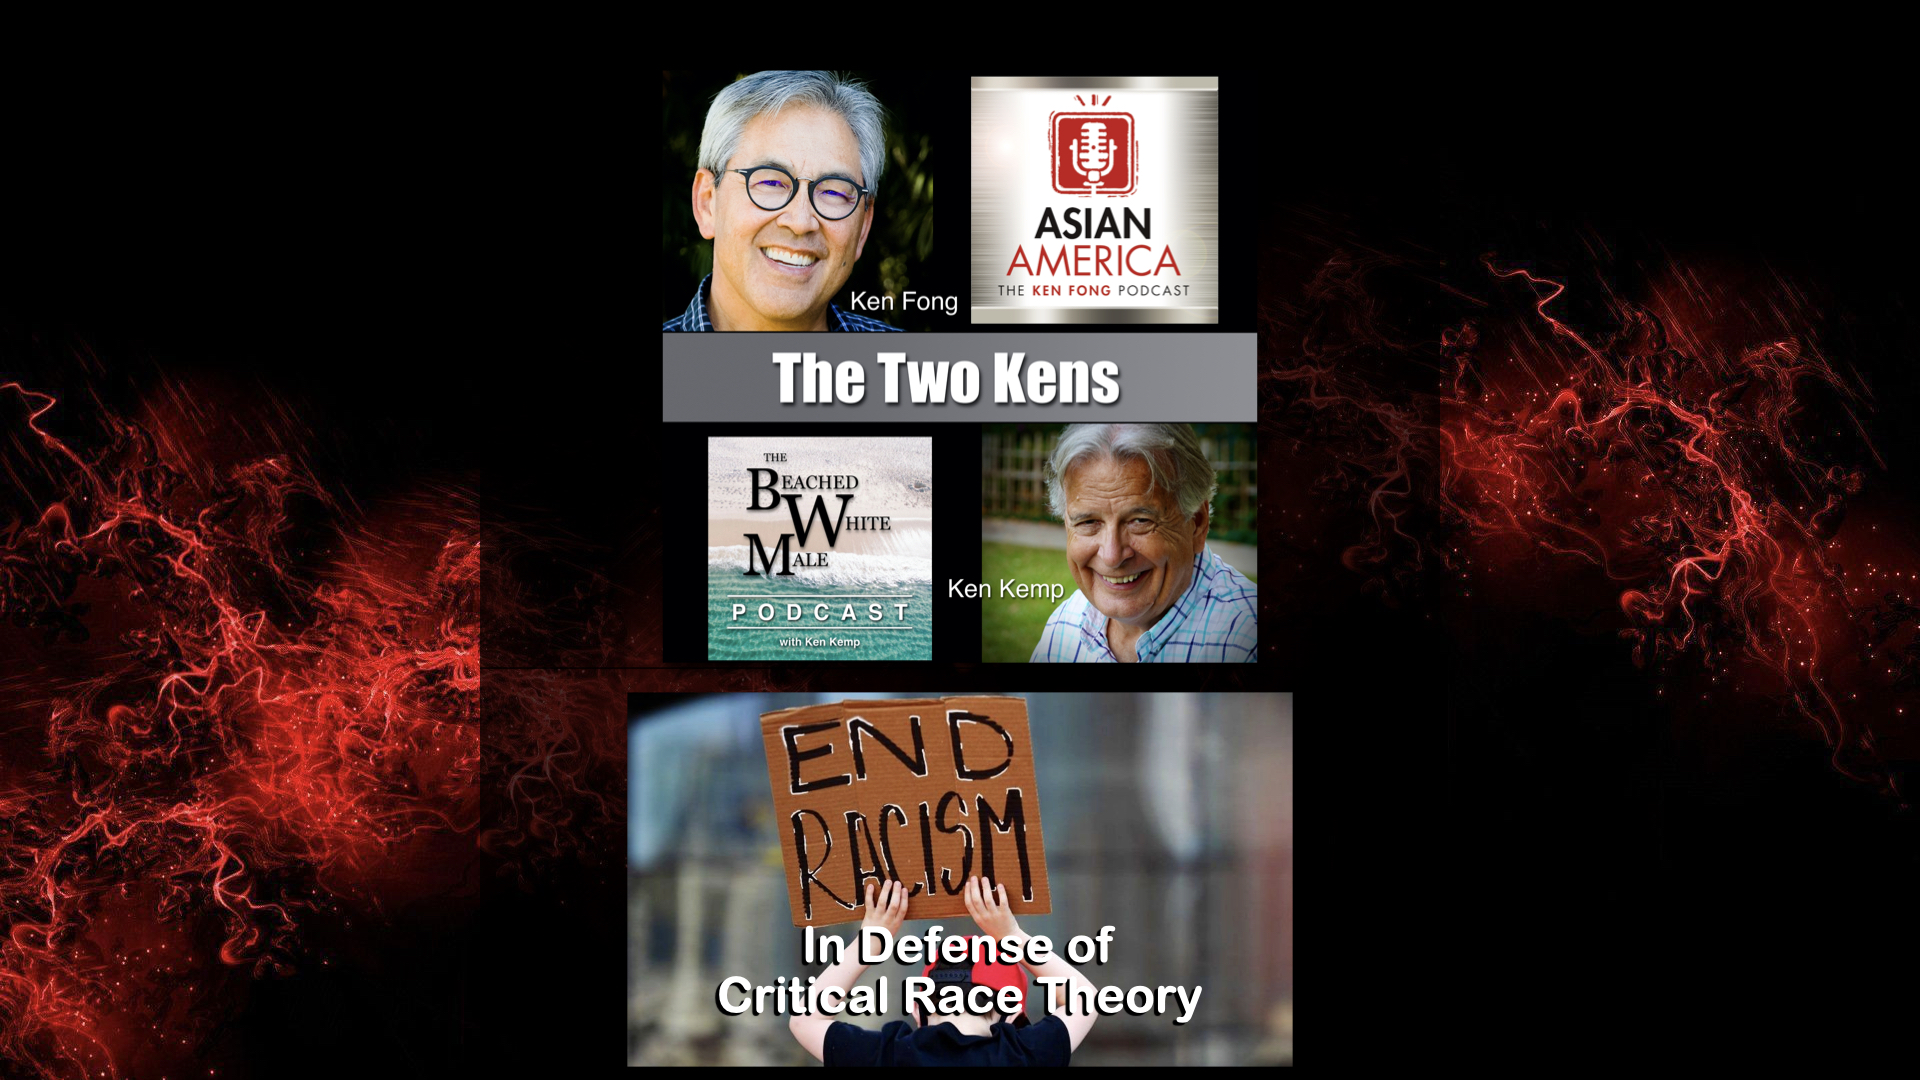 Ep 316: The Two Ken’s: Discussing and Defending Critical Race Theory